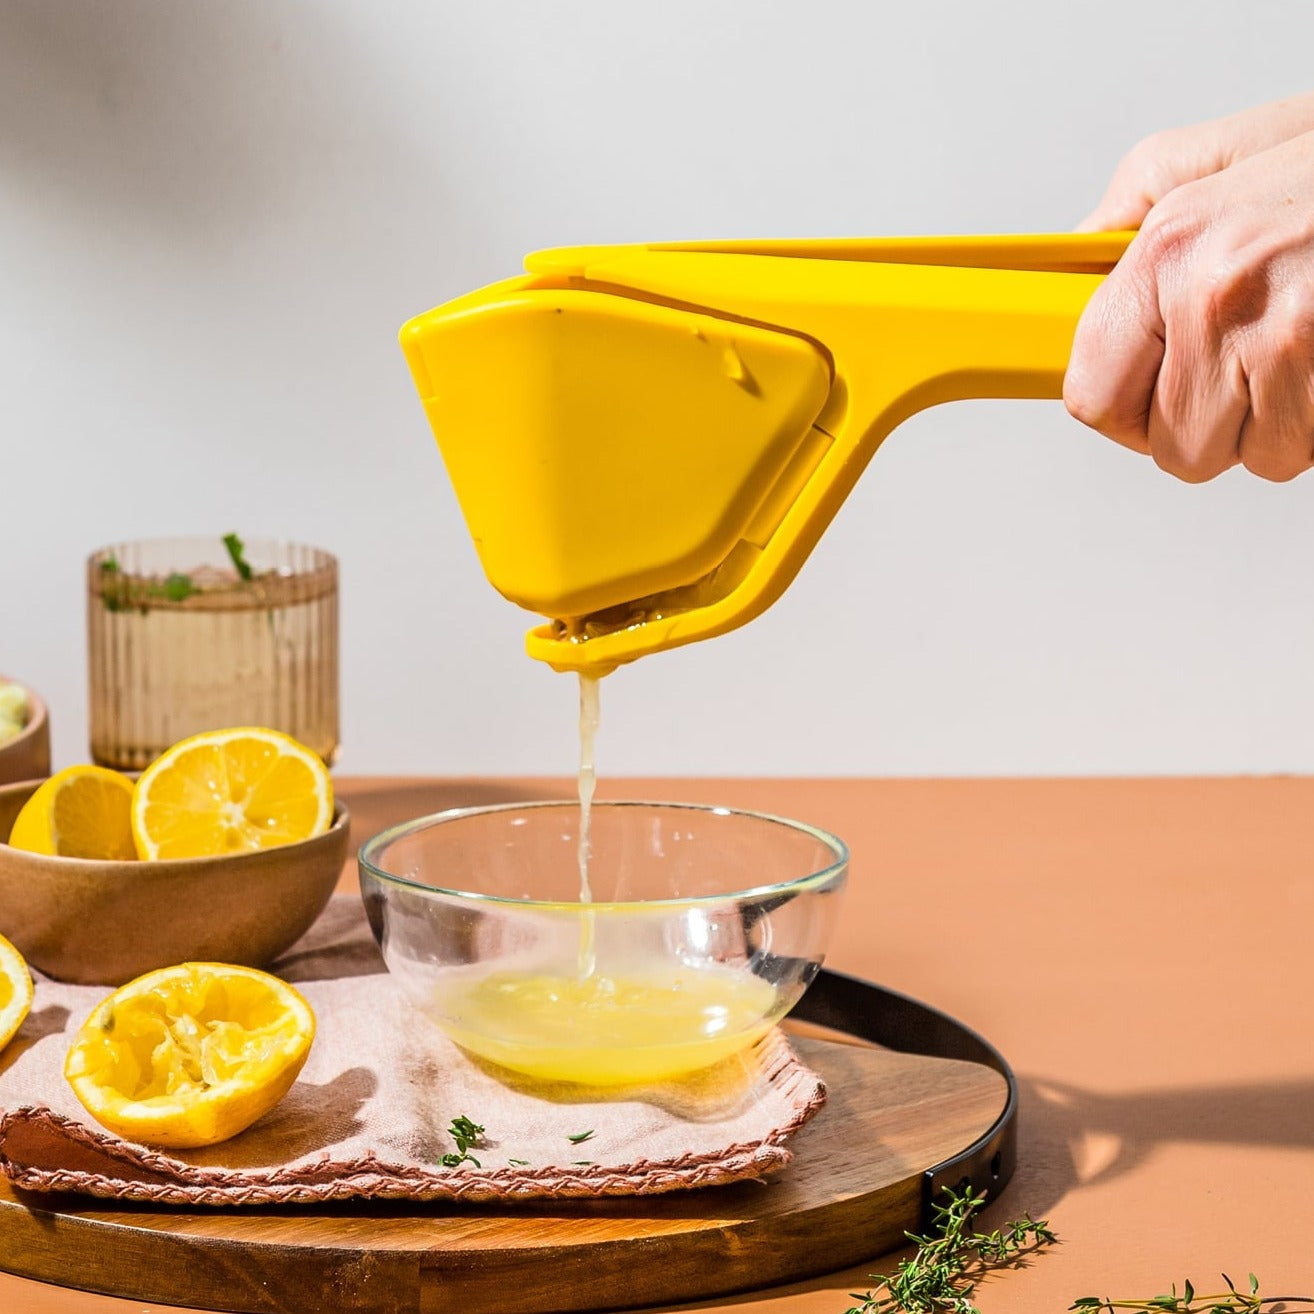 A person is squeezing lemon juice into a glass bowl